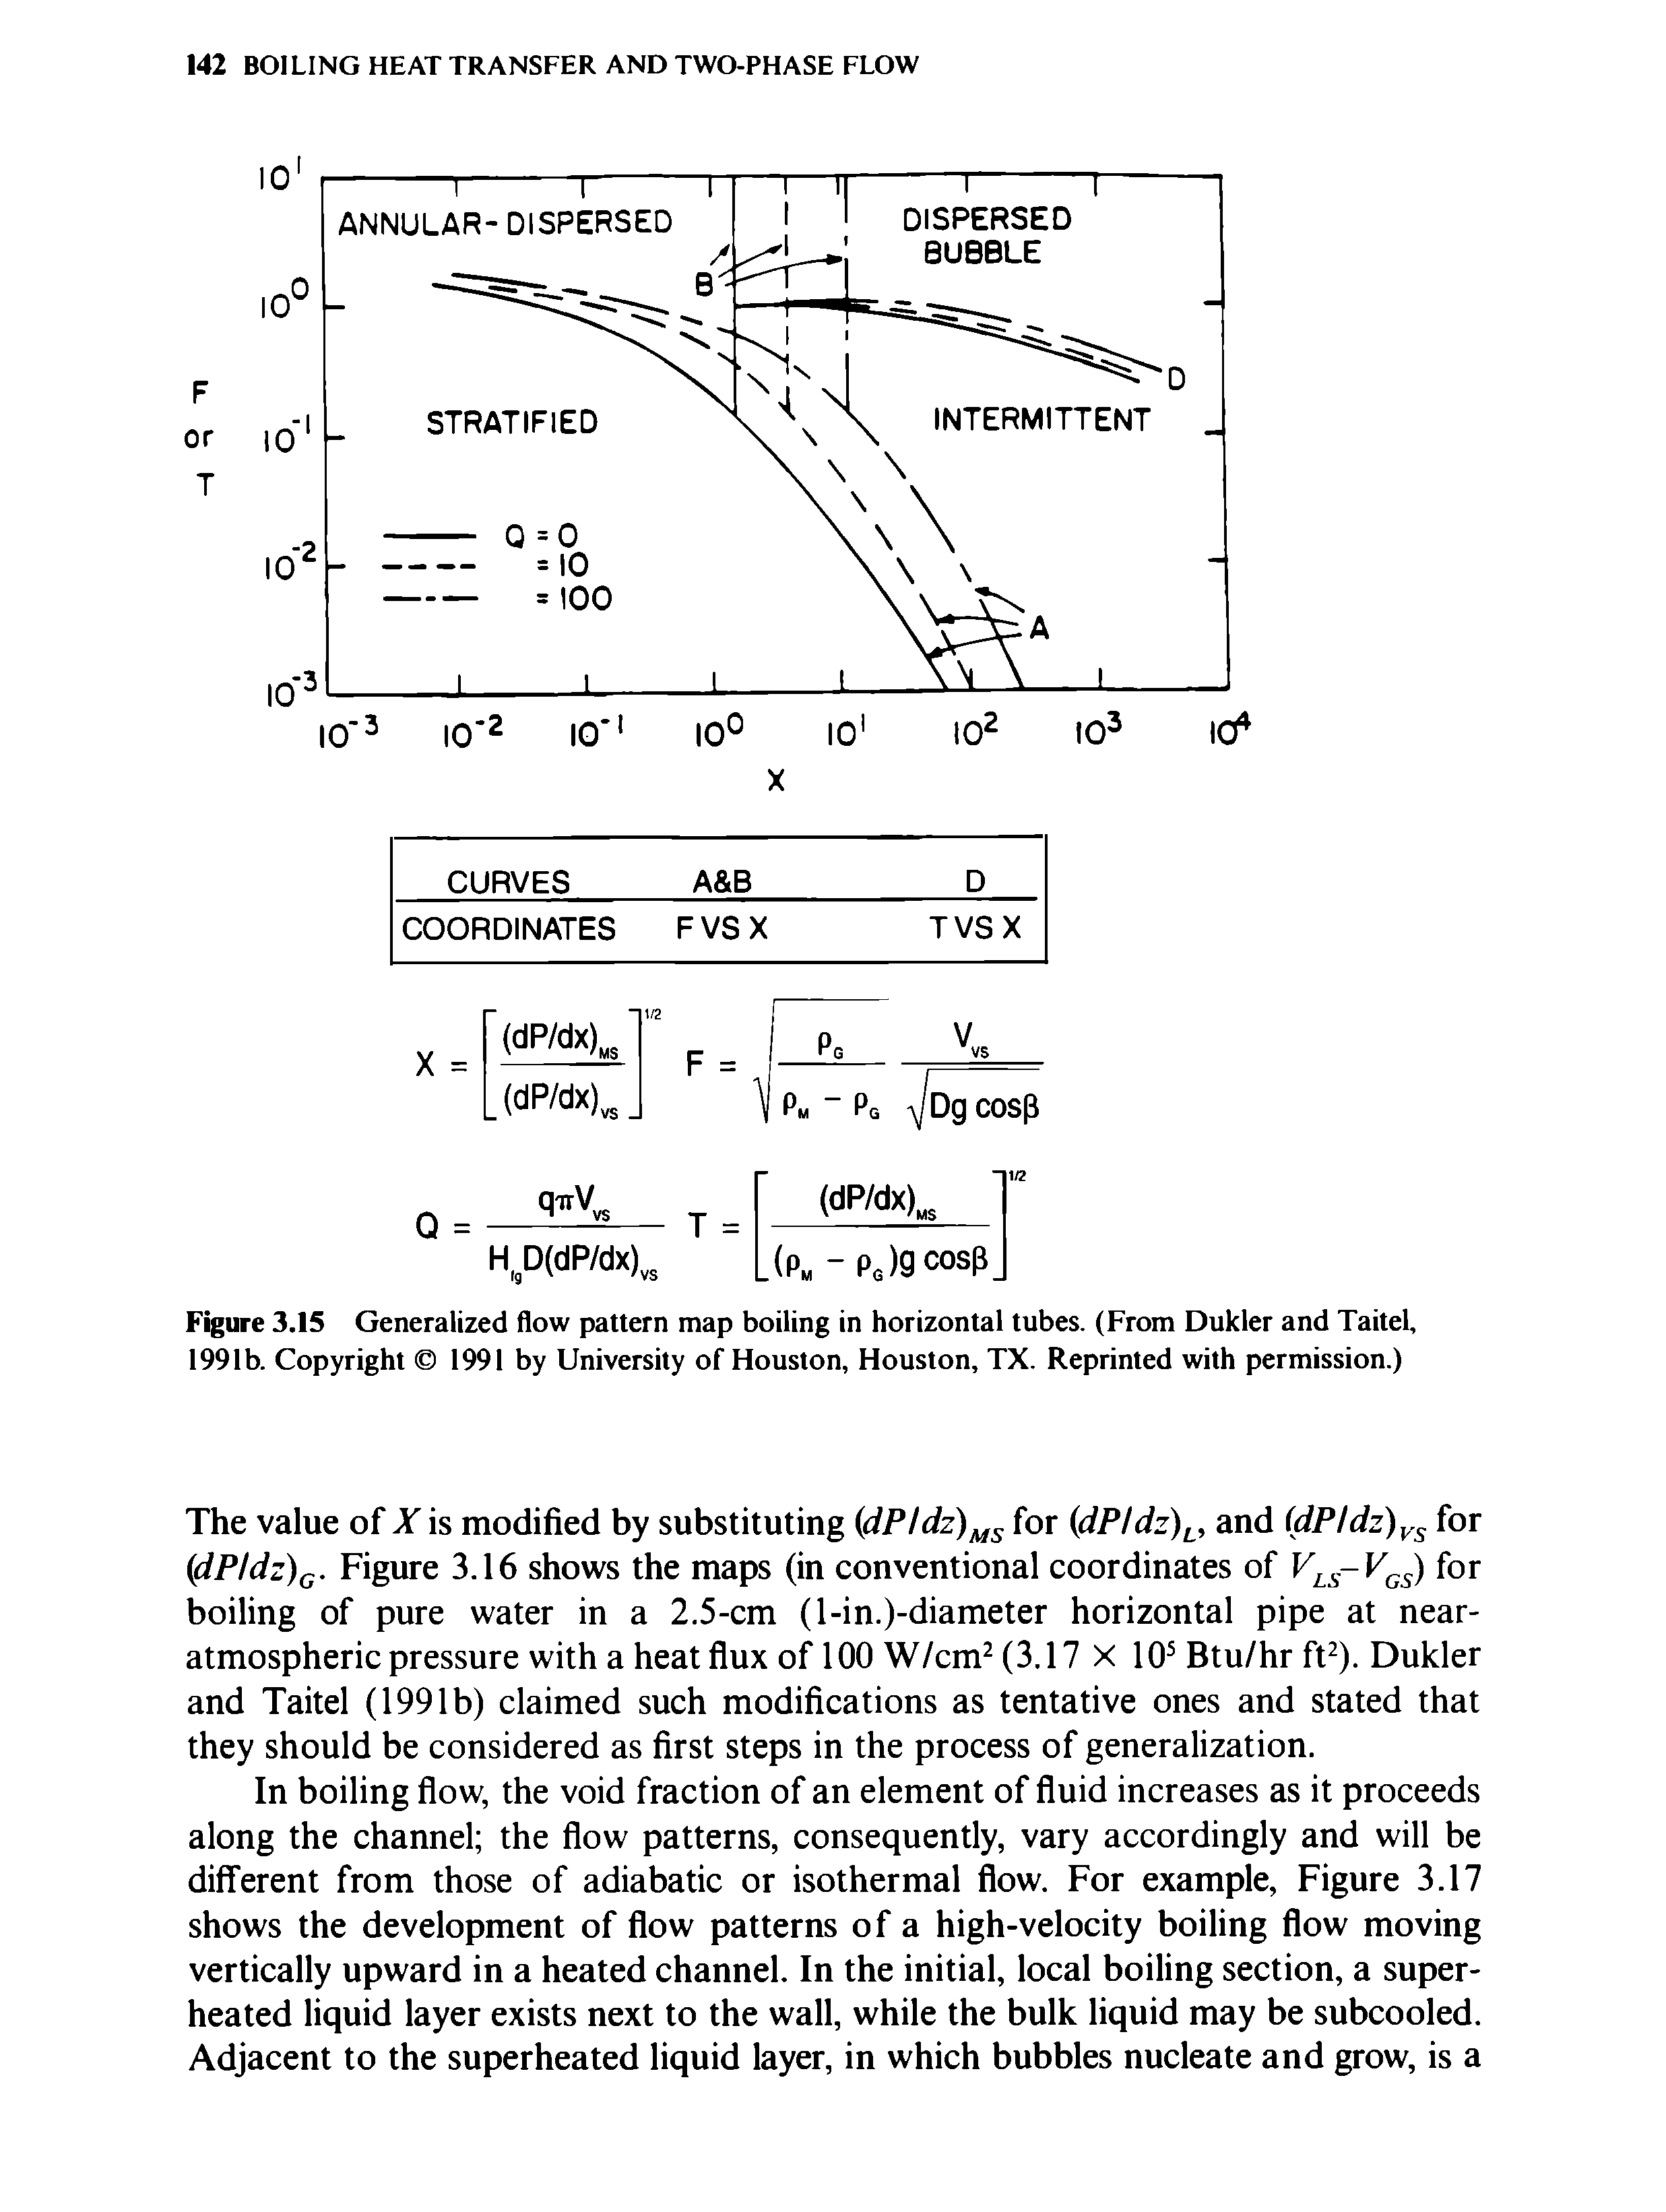 Figure 3.15 Generalized flow pattern map boiling in horizontal tubes. (From Dukler and Taitel, 1991b. Copyright 1991 by University of Houston, Houston, TX. Reprinted with permission.)...